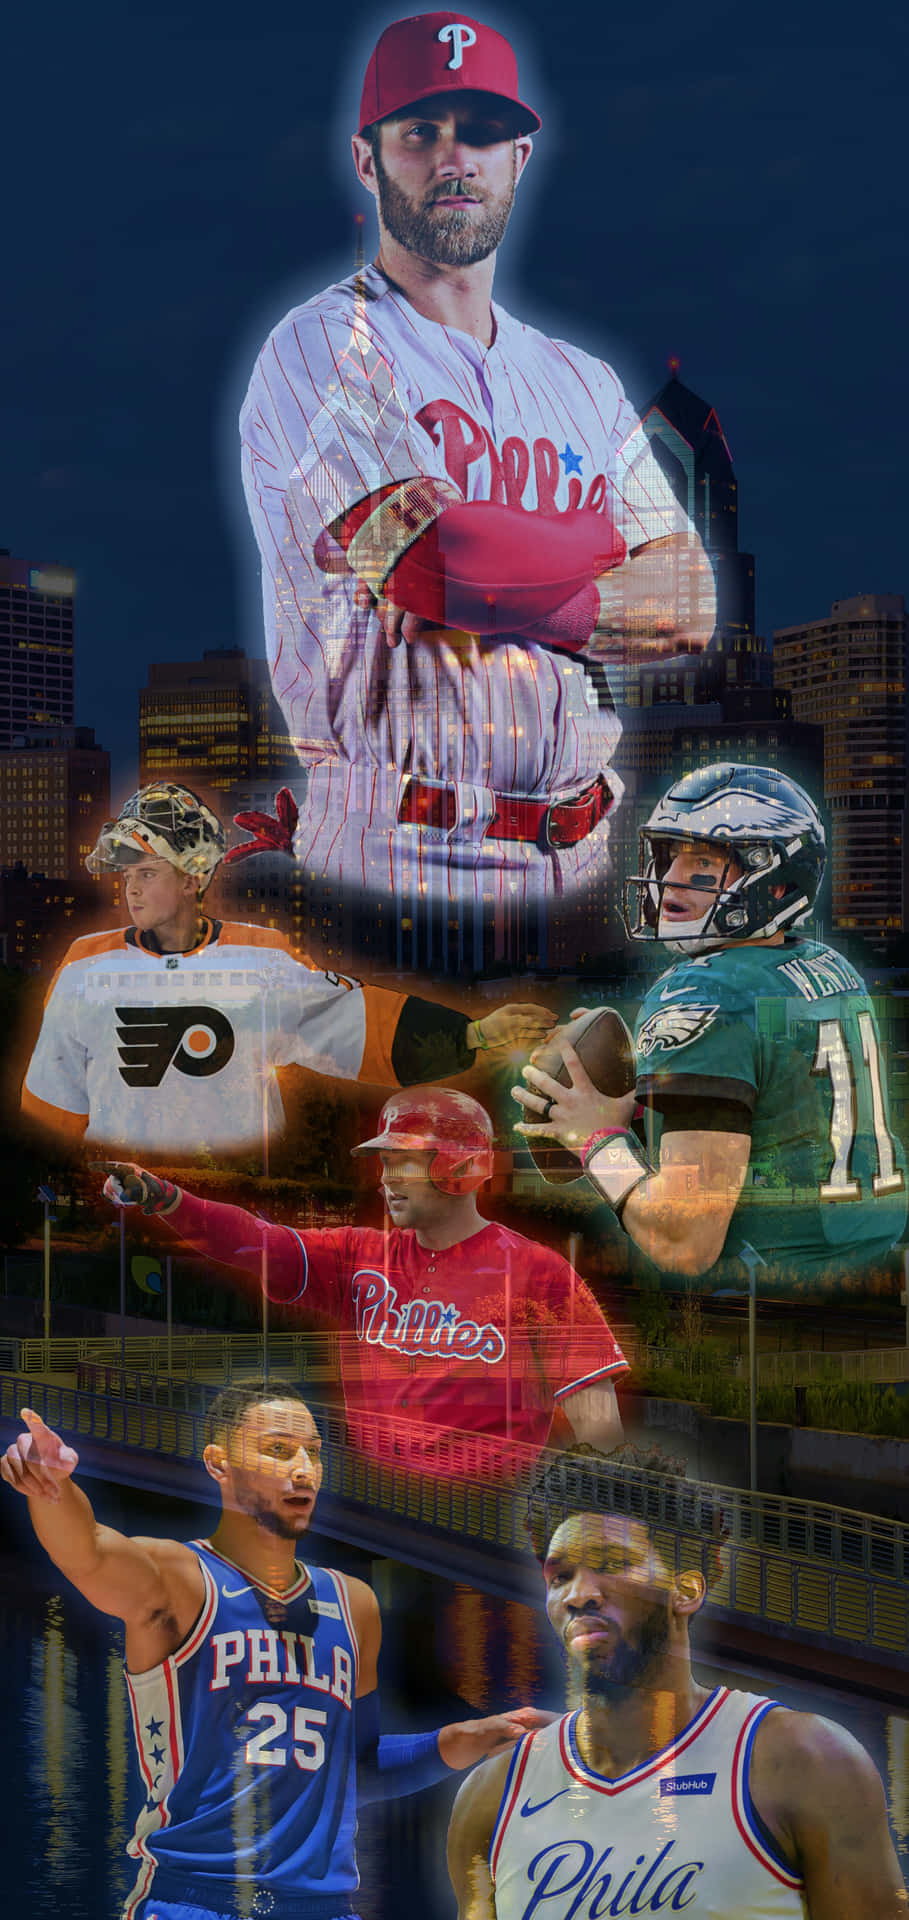 A Collage Of Baseball Players In A City Wallpaper